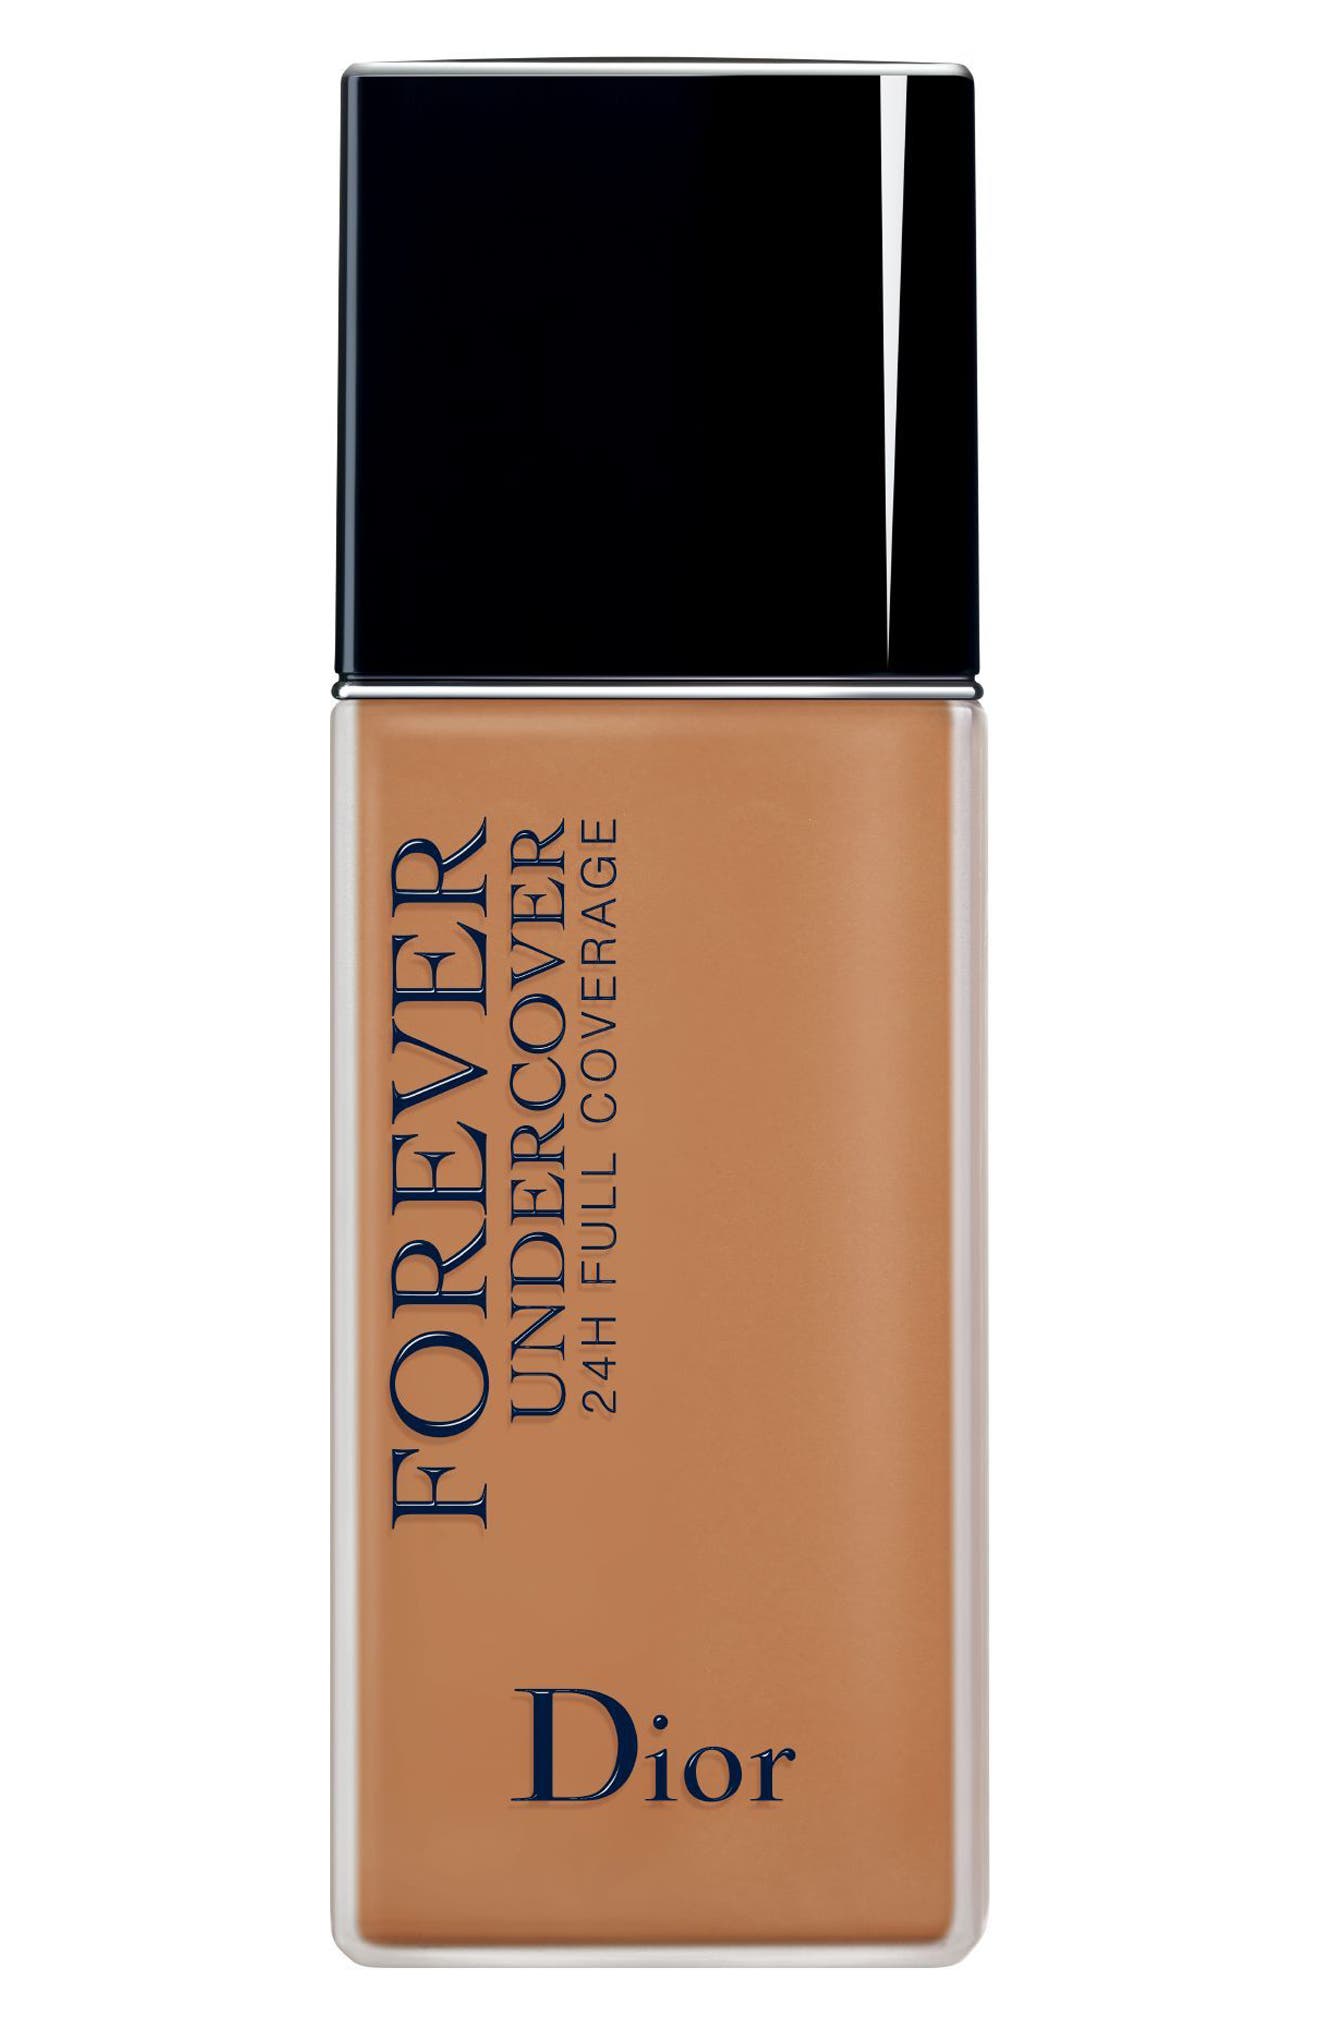 dior water based foundation